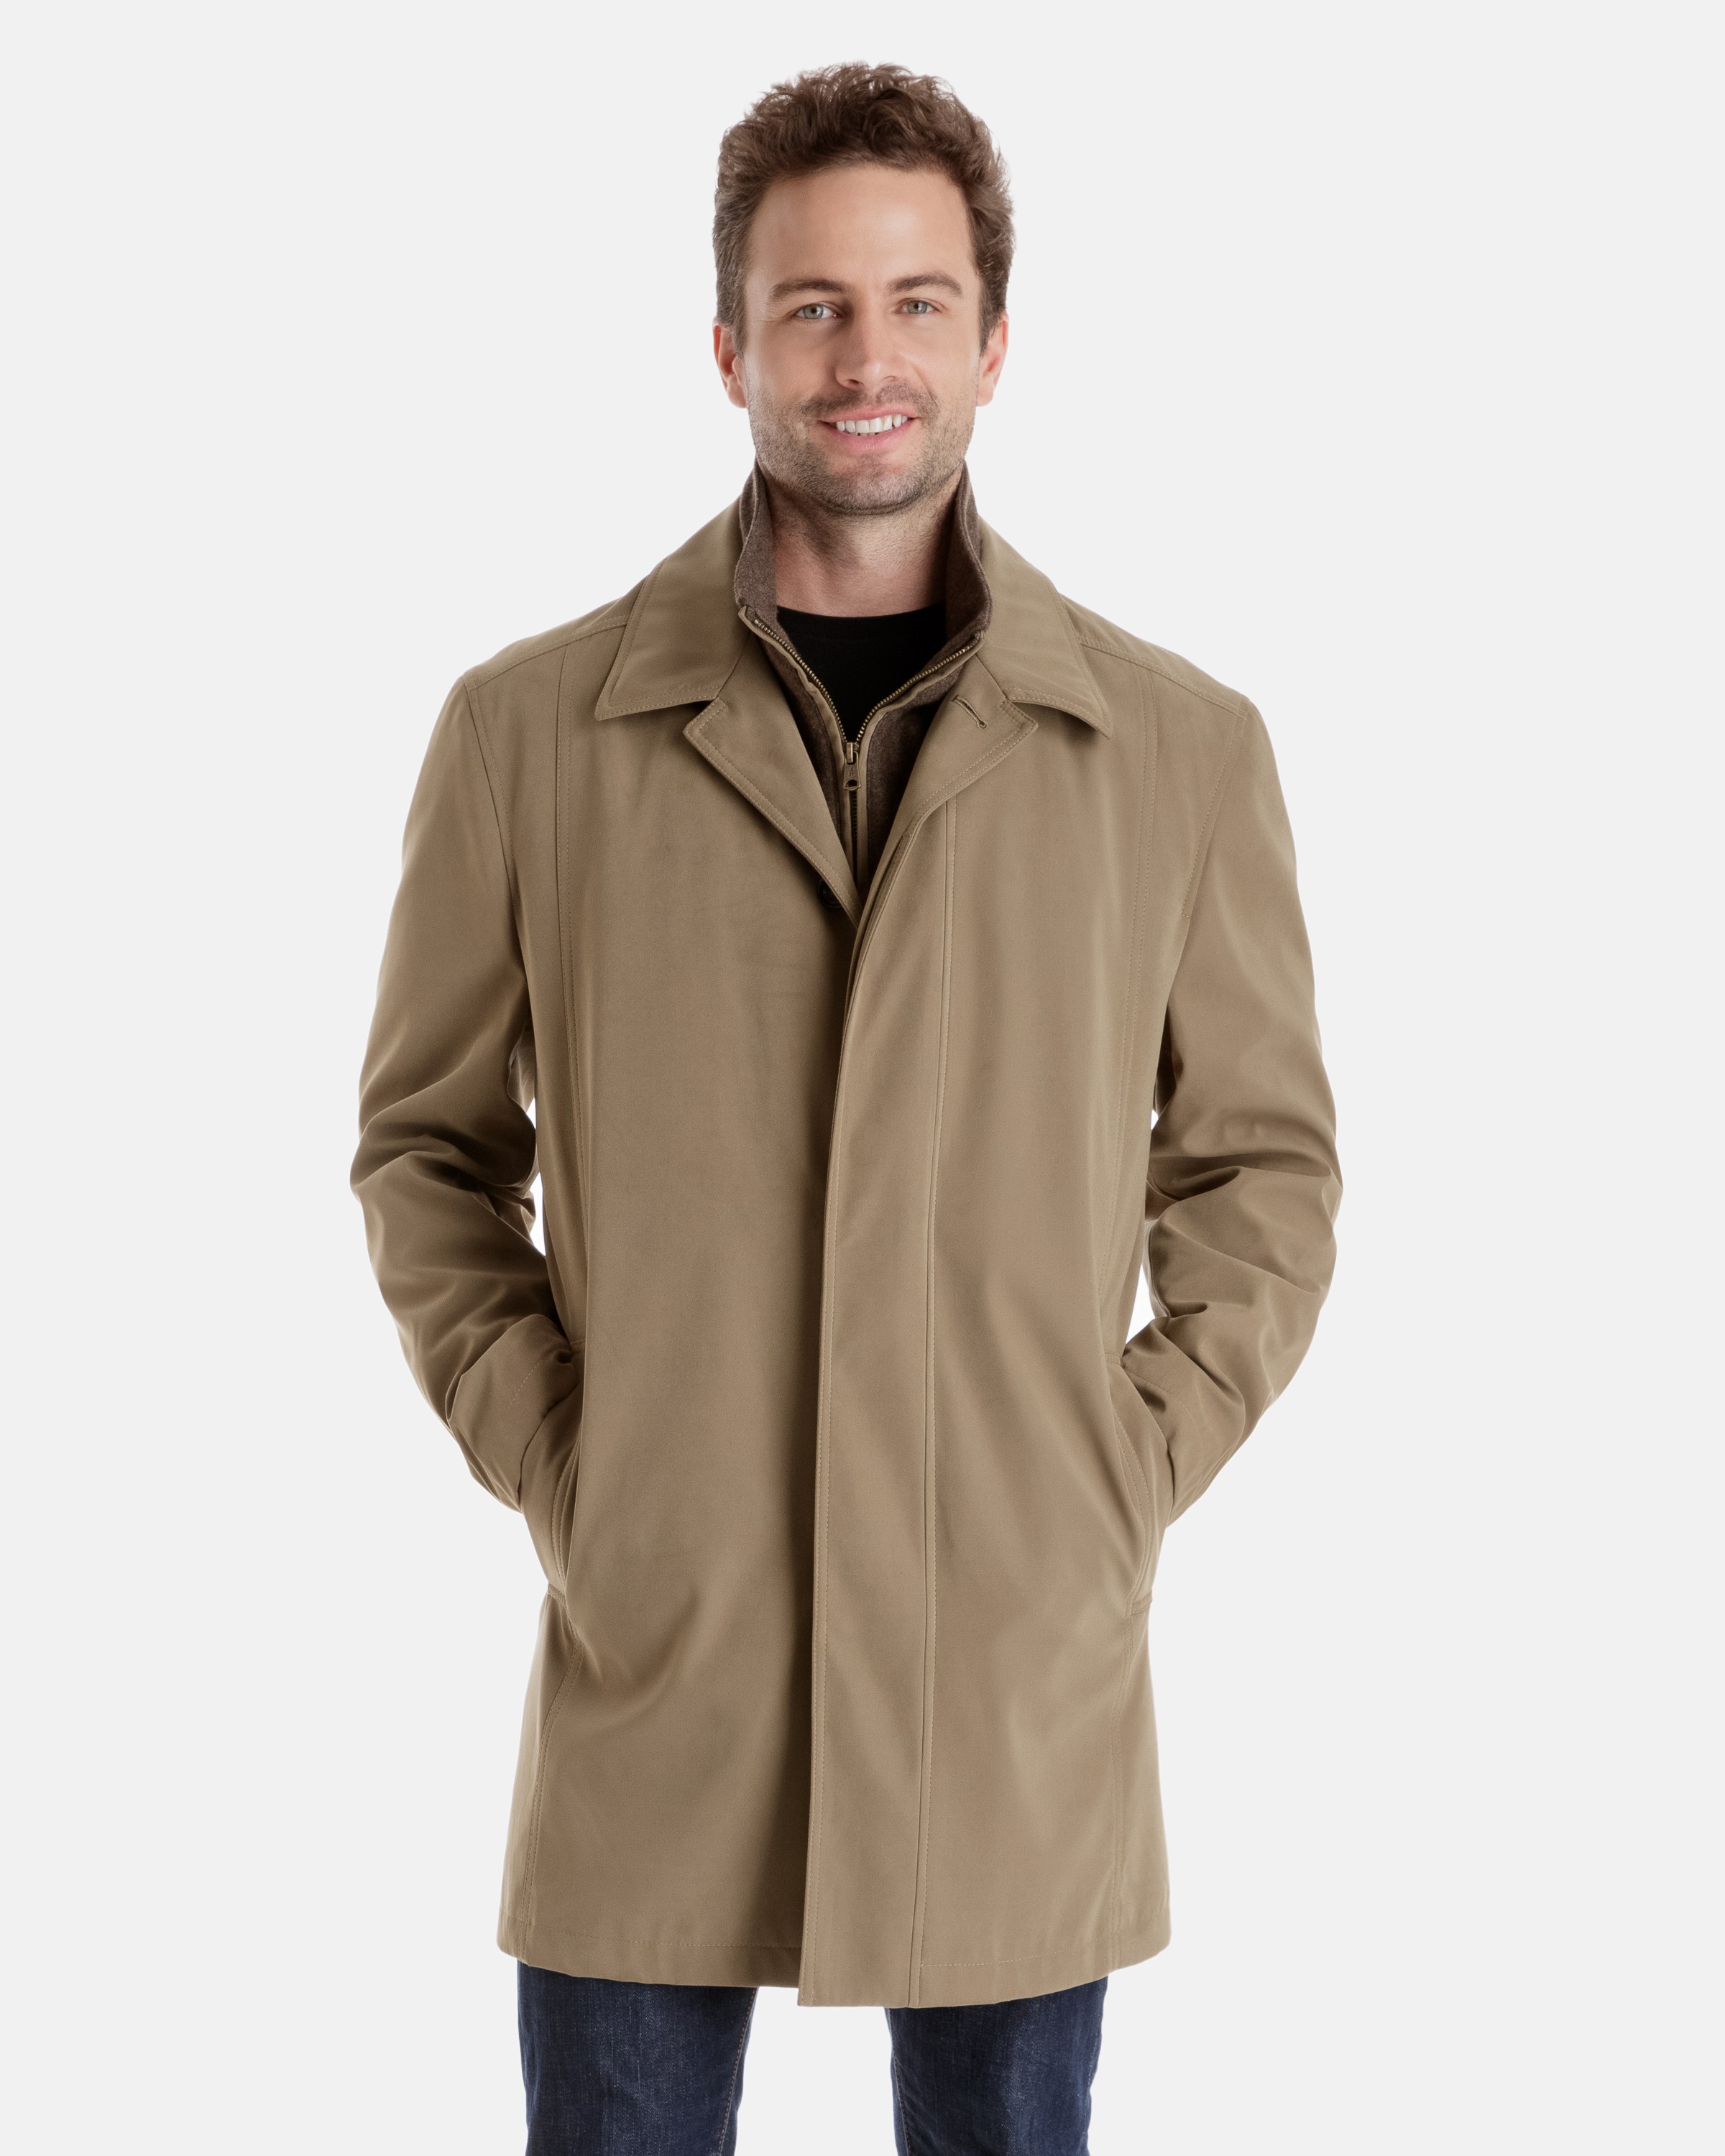 Getting the right men’s rain coat for your body